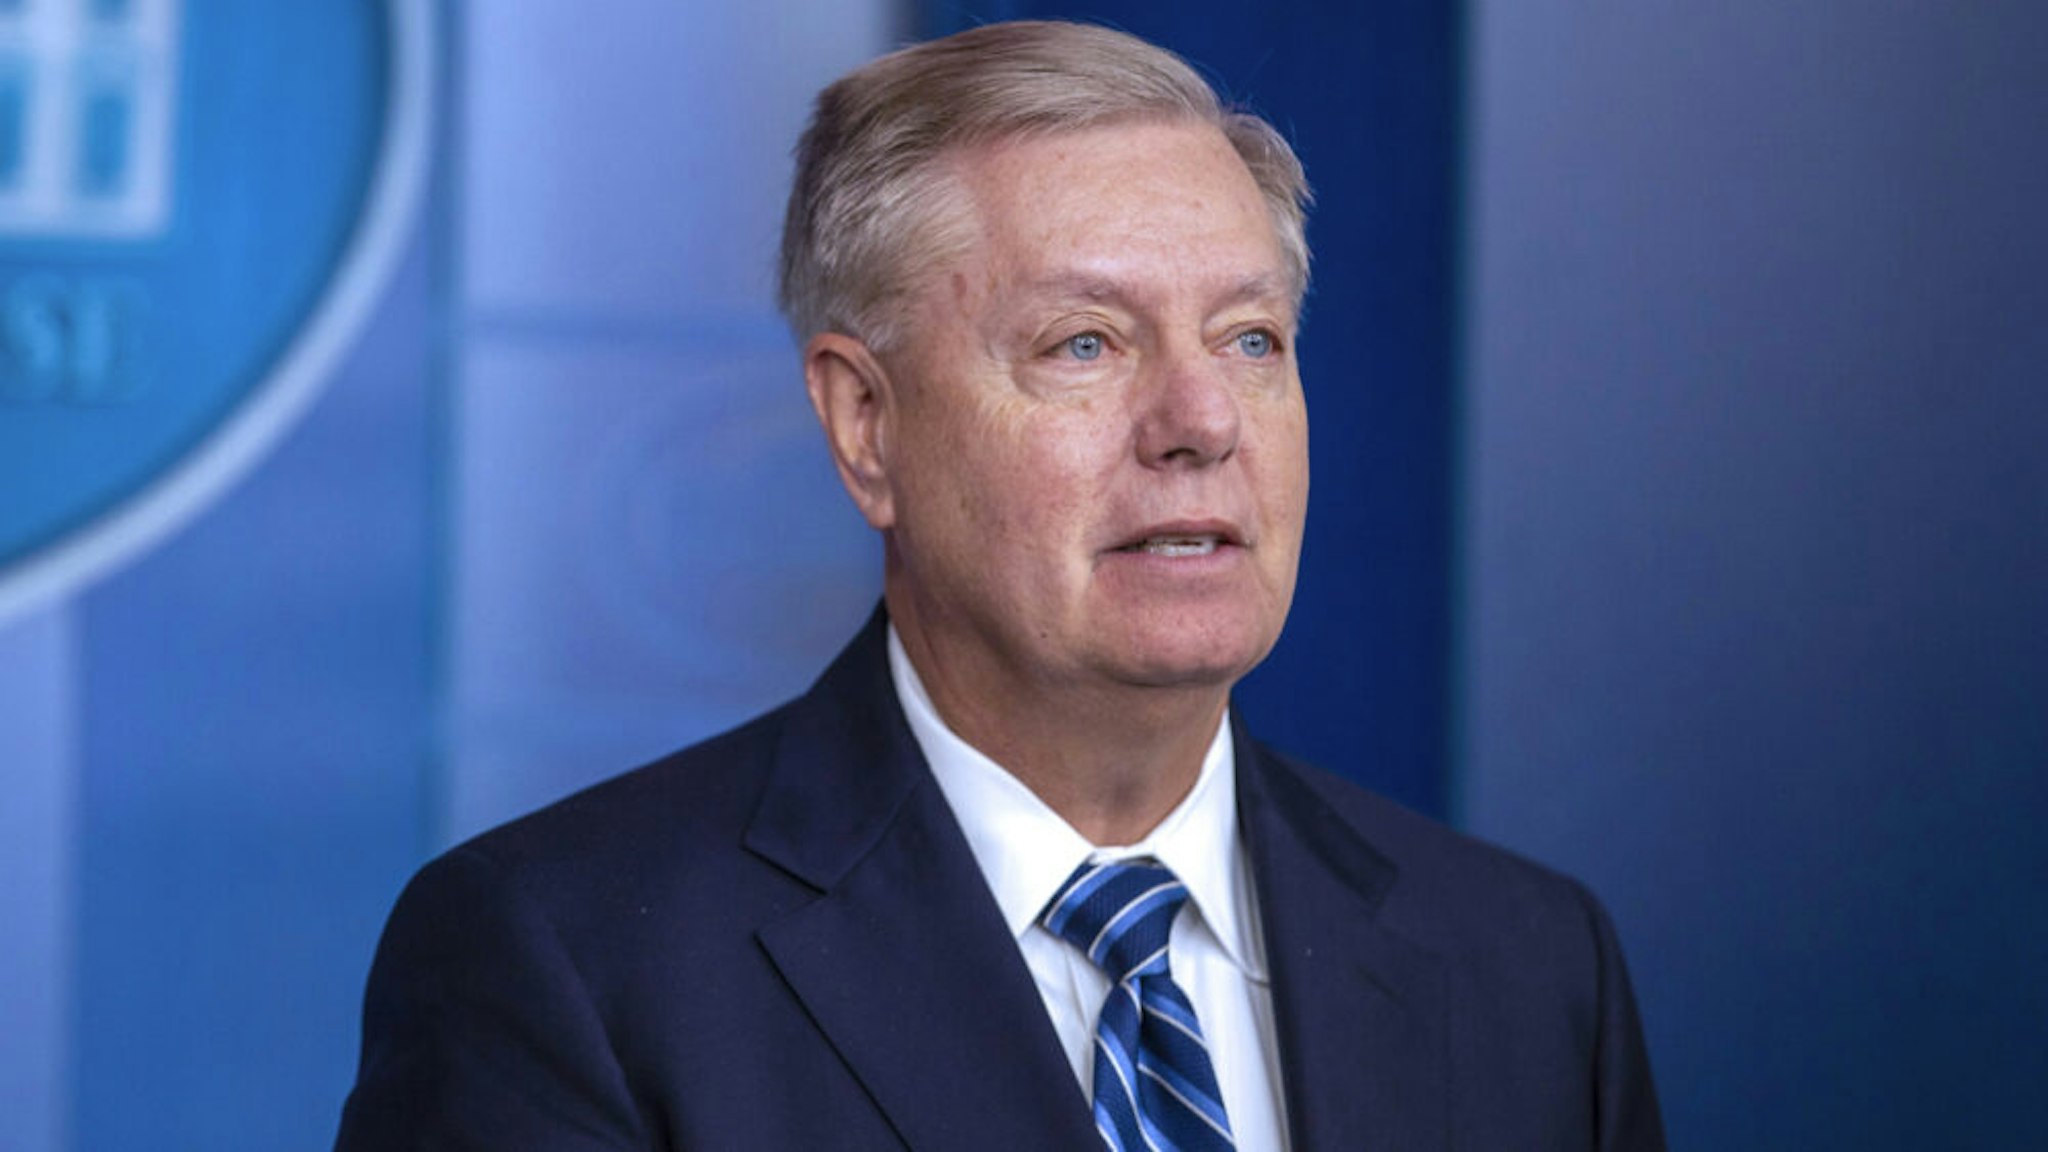 WASHINGTON, DC - OCTOBER 27: U.S. Senator Lindsey Graham (R-SC) speaks to the media after President Donald Trump delivered remarks on the death of ISIS leader Abu Bakr al-Baghdadi, at the White House on October 27, 2019 in Washington, DC. President Trump had announced that ISIS leader Abu Bakr al-Baghdadi has been killed in a military operation in northwest Syria.